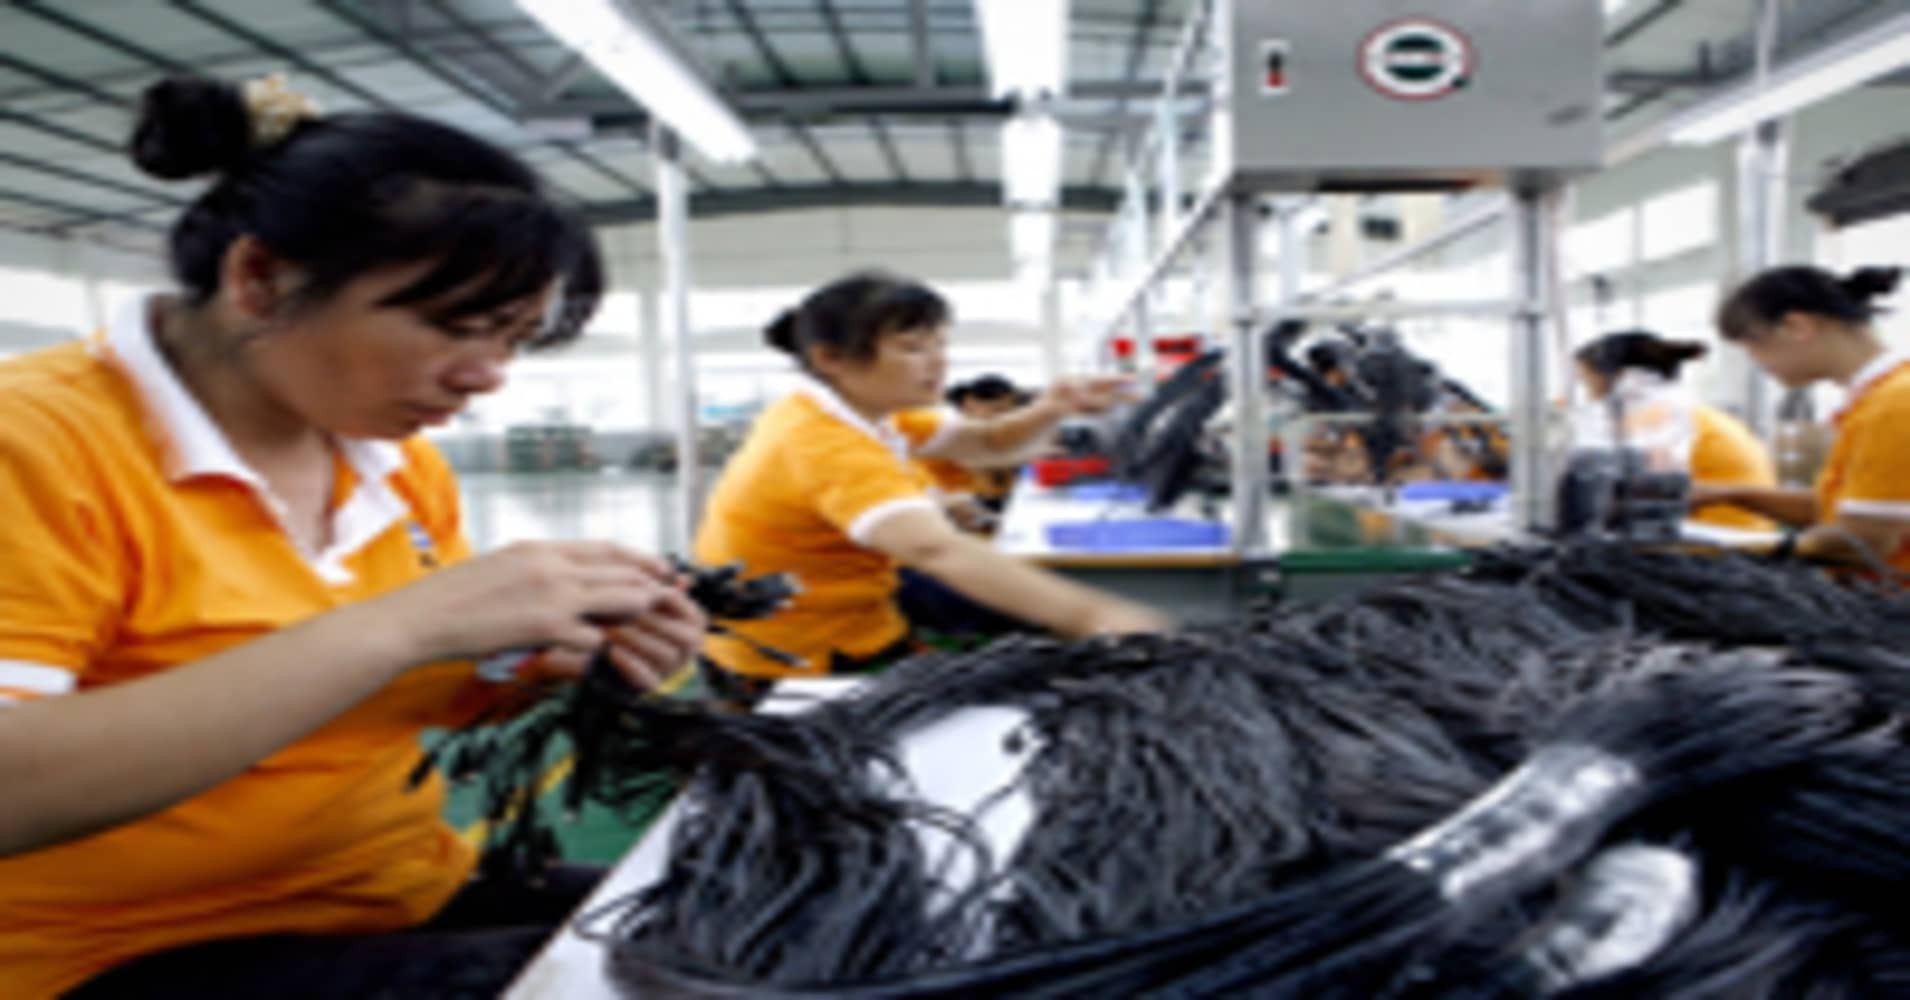 China's Role as 'World's Factory' Coming to an End